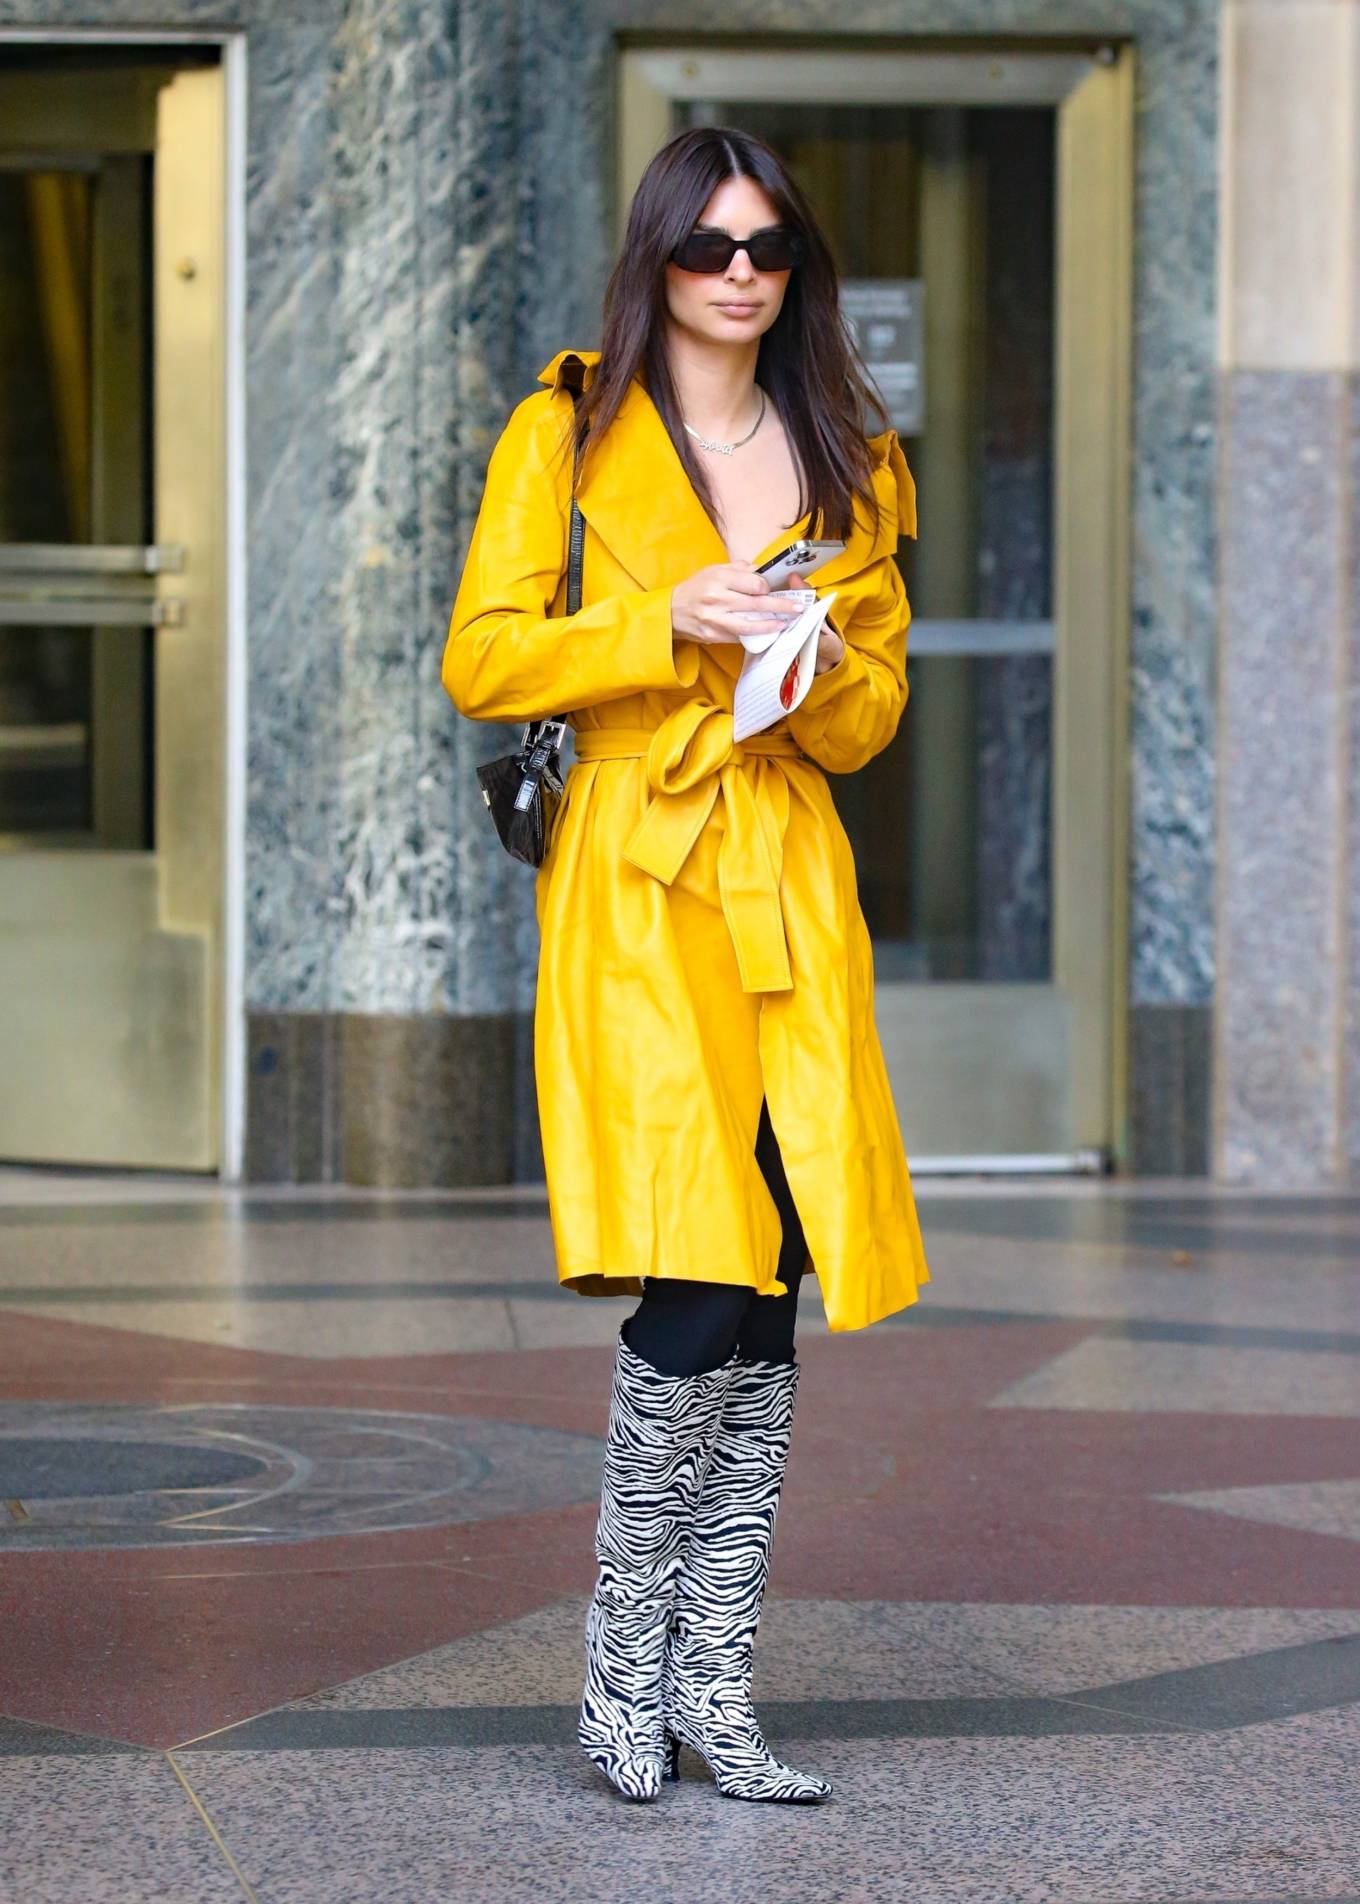 Emily Ratajkowski - In a yellow coat and zebra-striped boots in New York